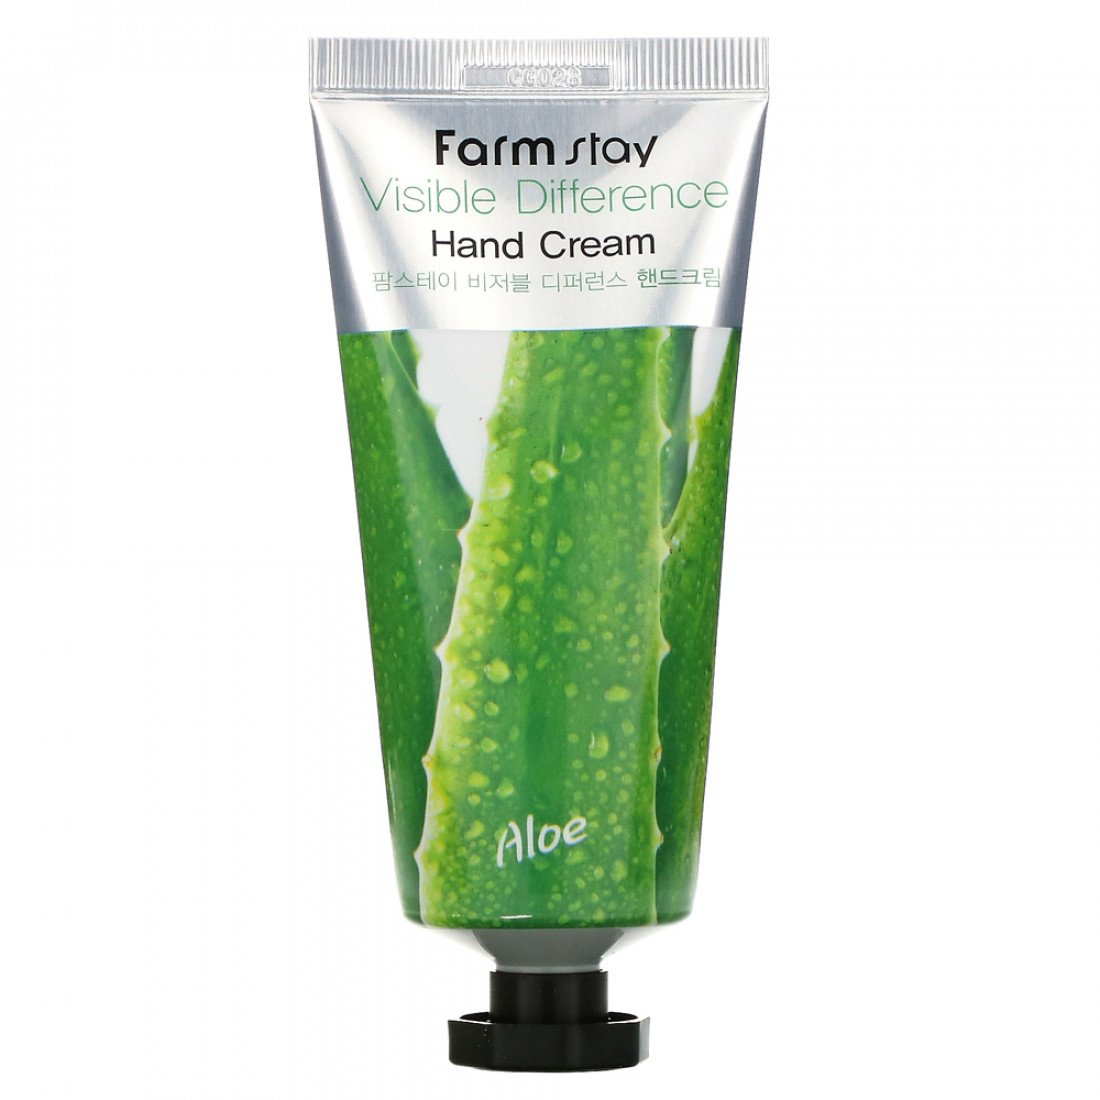 Farm stay visible difference aloe hand cream 100g